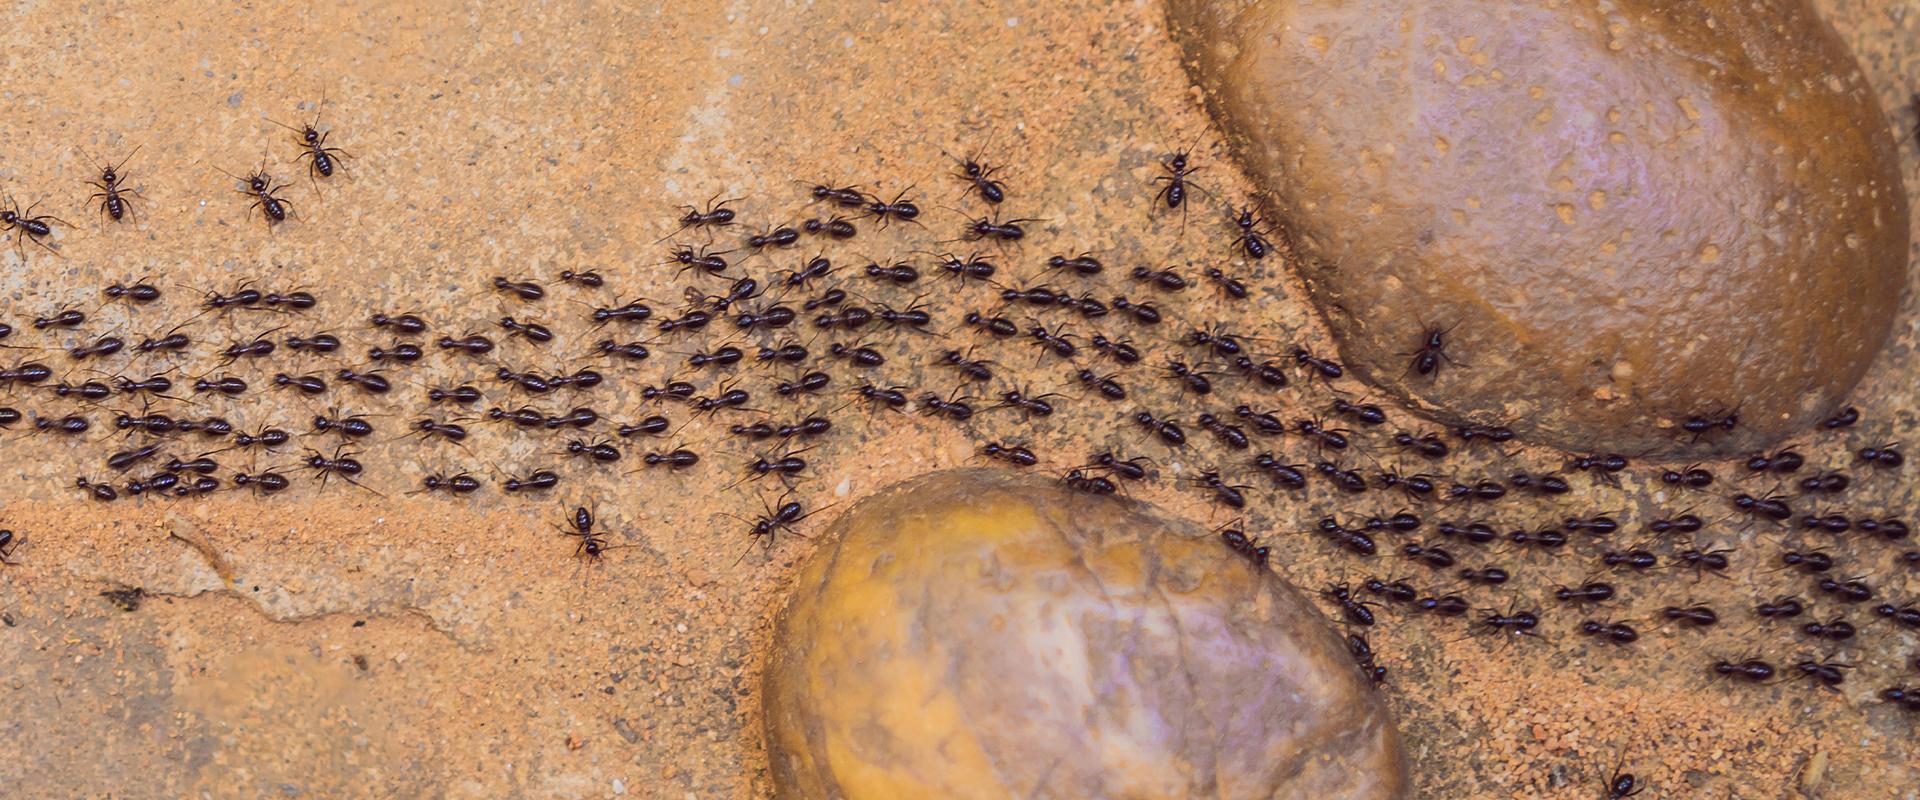 ants marching in the dirt